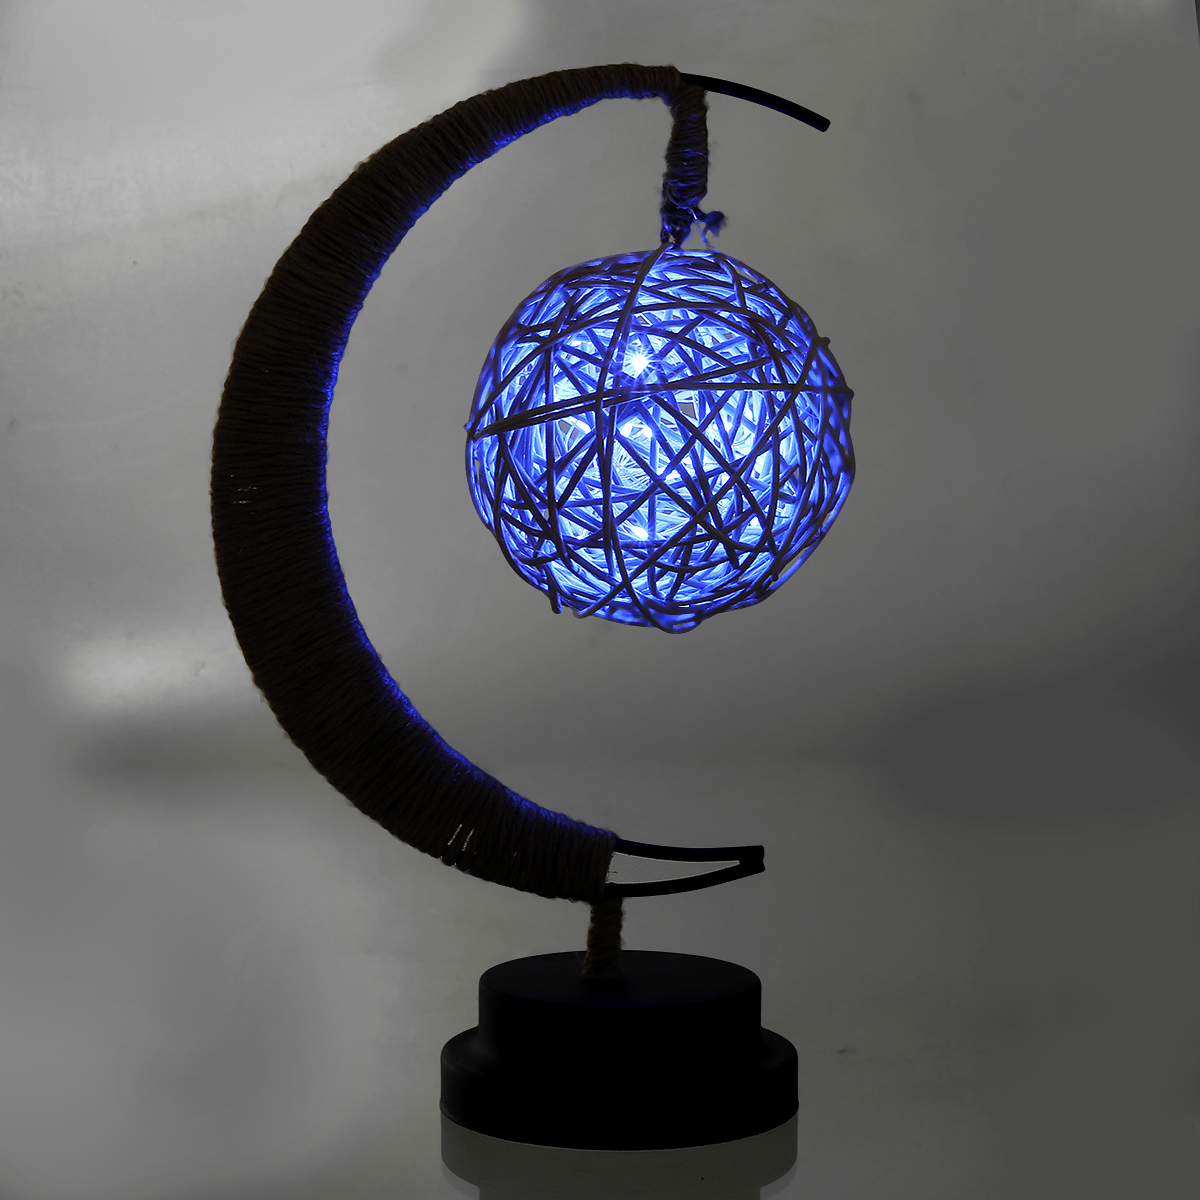 3D-LED-Night-Lights-Wishing-Table-Lamp-Battery-Decorative-Party-Home-Christmas-Decorations-Clearance-1720551-12